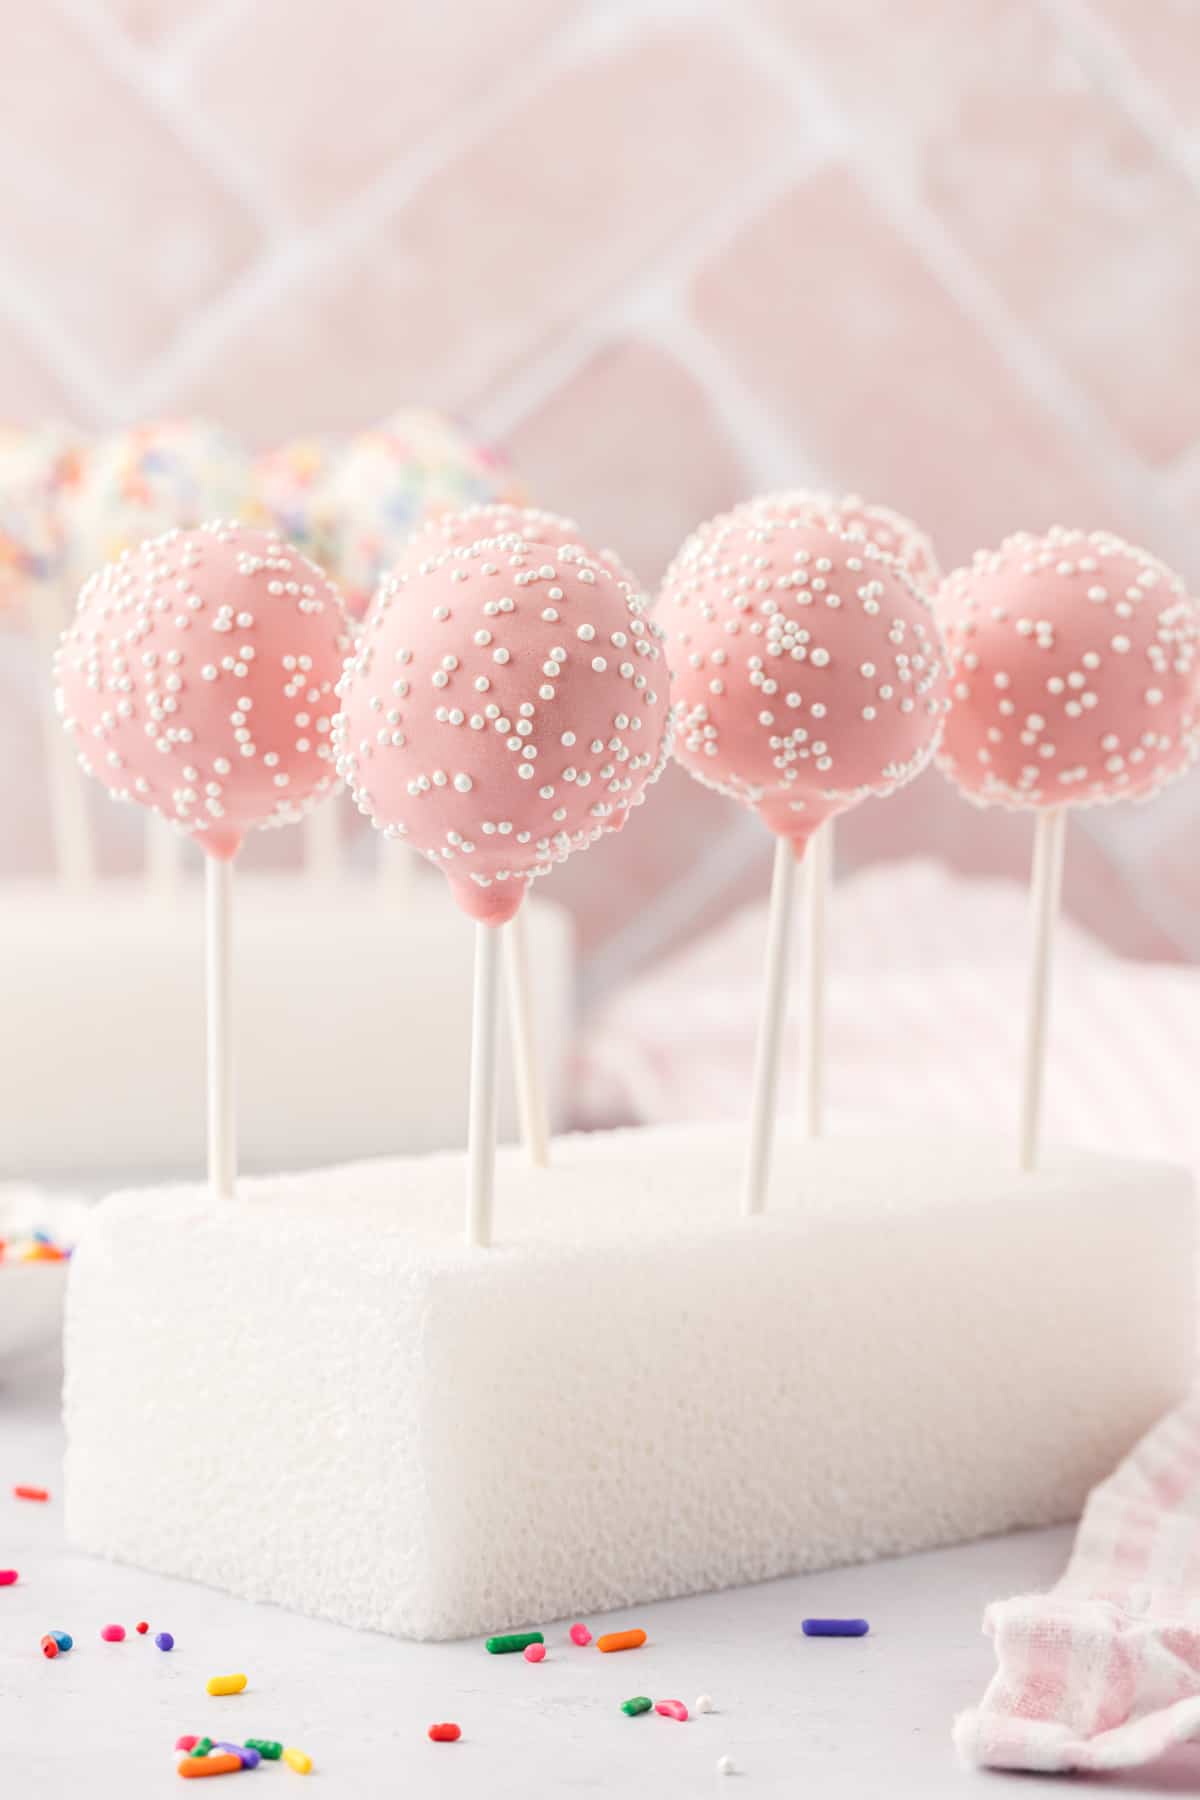 a styrofoam block with 6 pink cake pops with white sprinkles stuck in it so they stand straight up, with a white and pink striped towel and rainbow sprinkles scattered around it